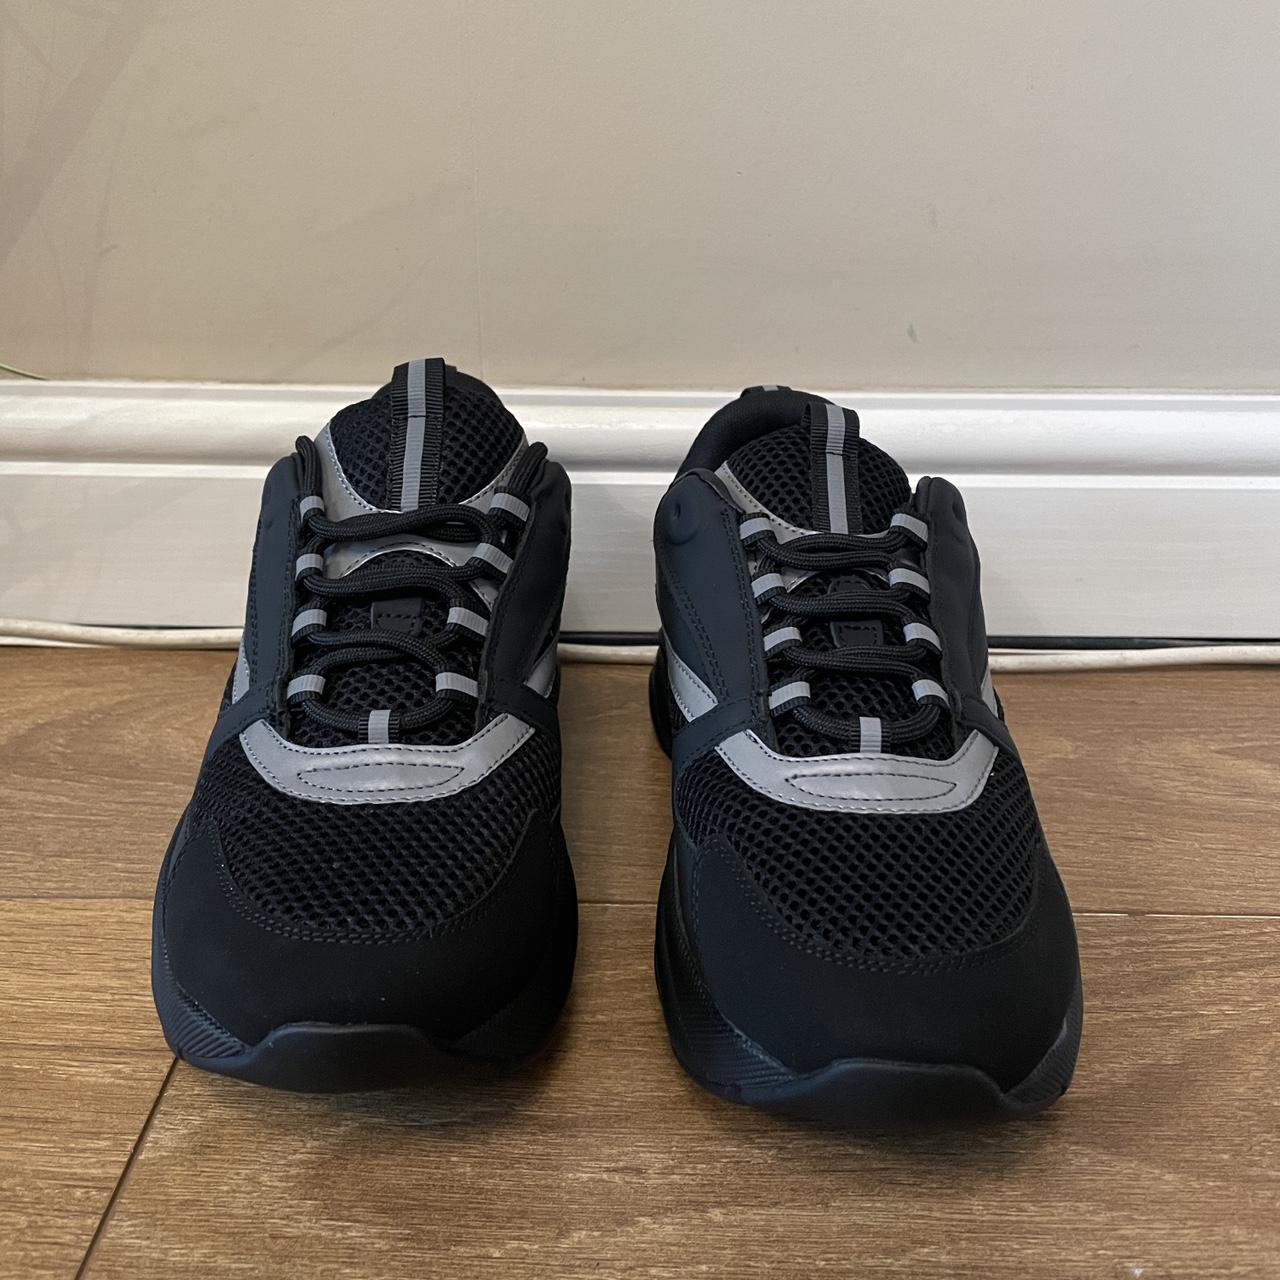 Dior b22 Black colour way with reflective detailing... - Depop